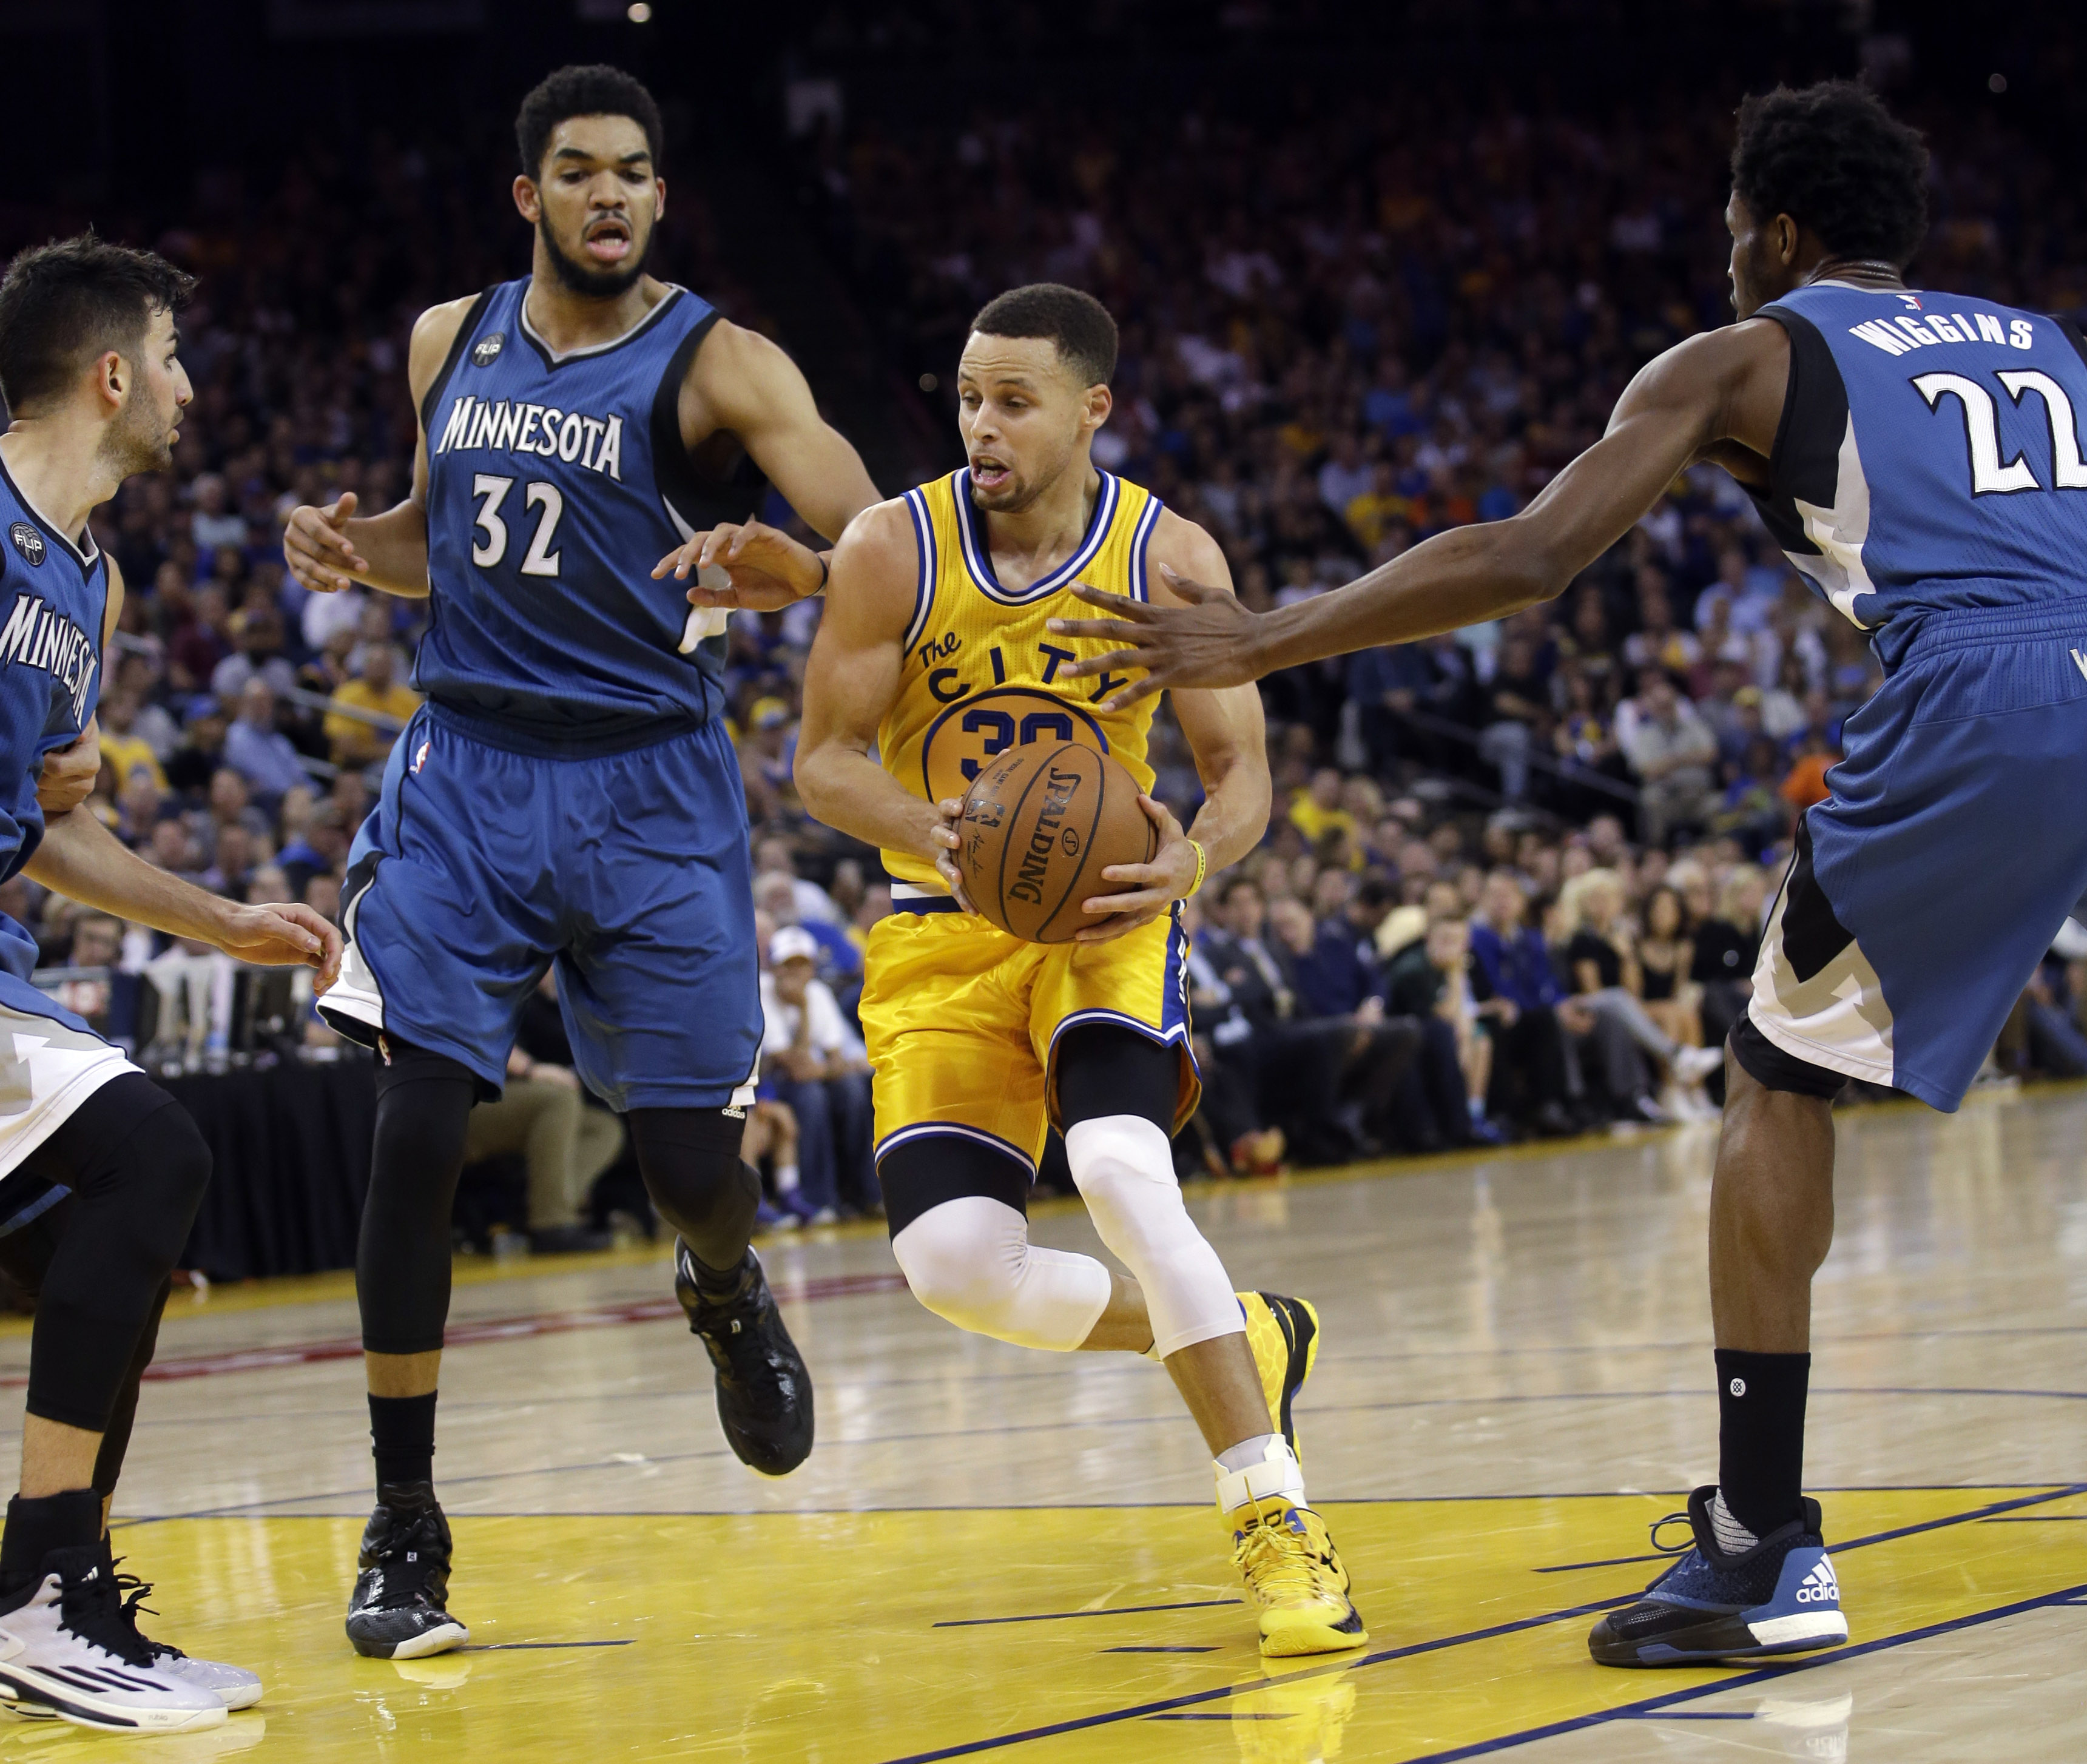 Golden State Warriors' Stephen Curry is surrounded by Minnesota Timberwolves defenders as he drives to the basket during the second half of an NBA basketball game Tuesday, April 5, 2016, in Oakland, Calif. AP